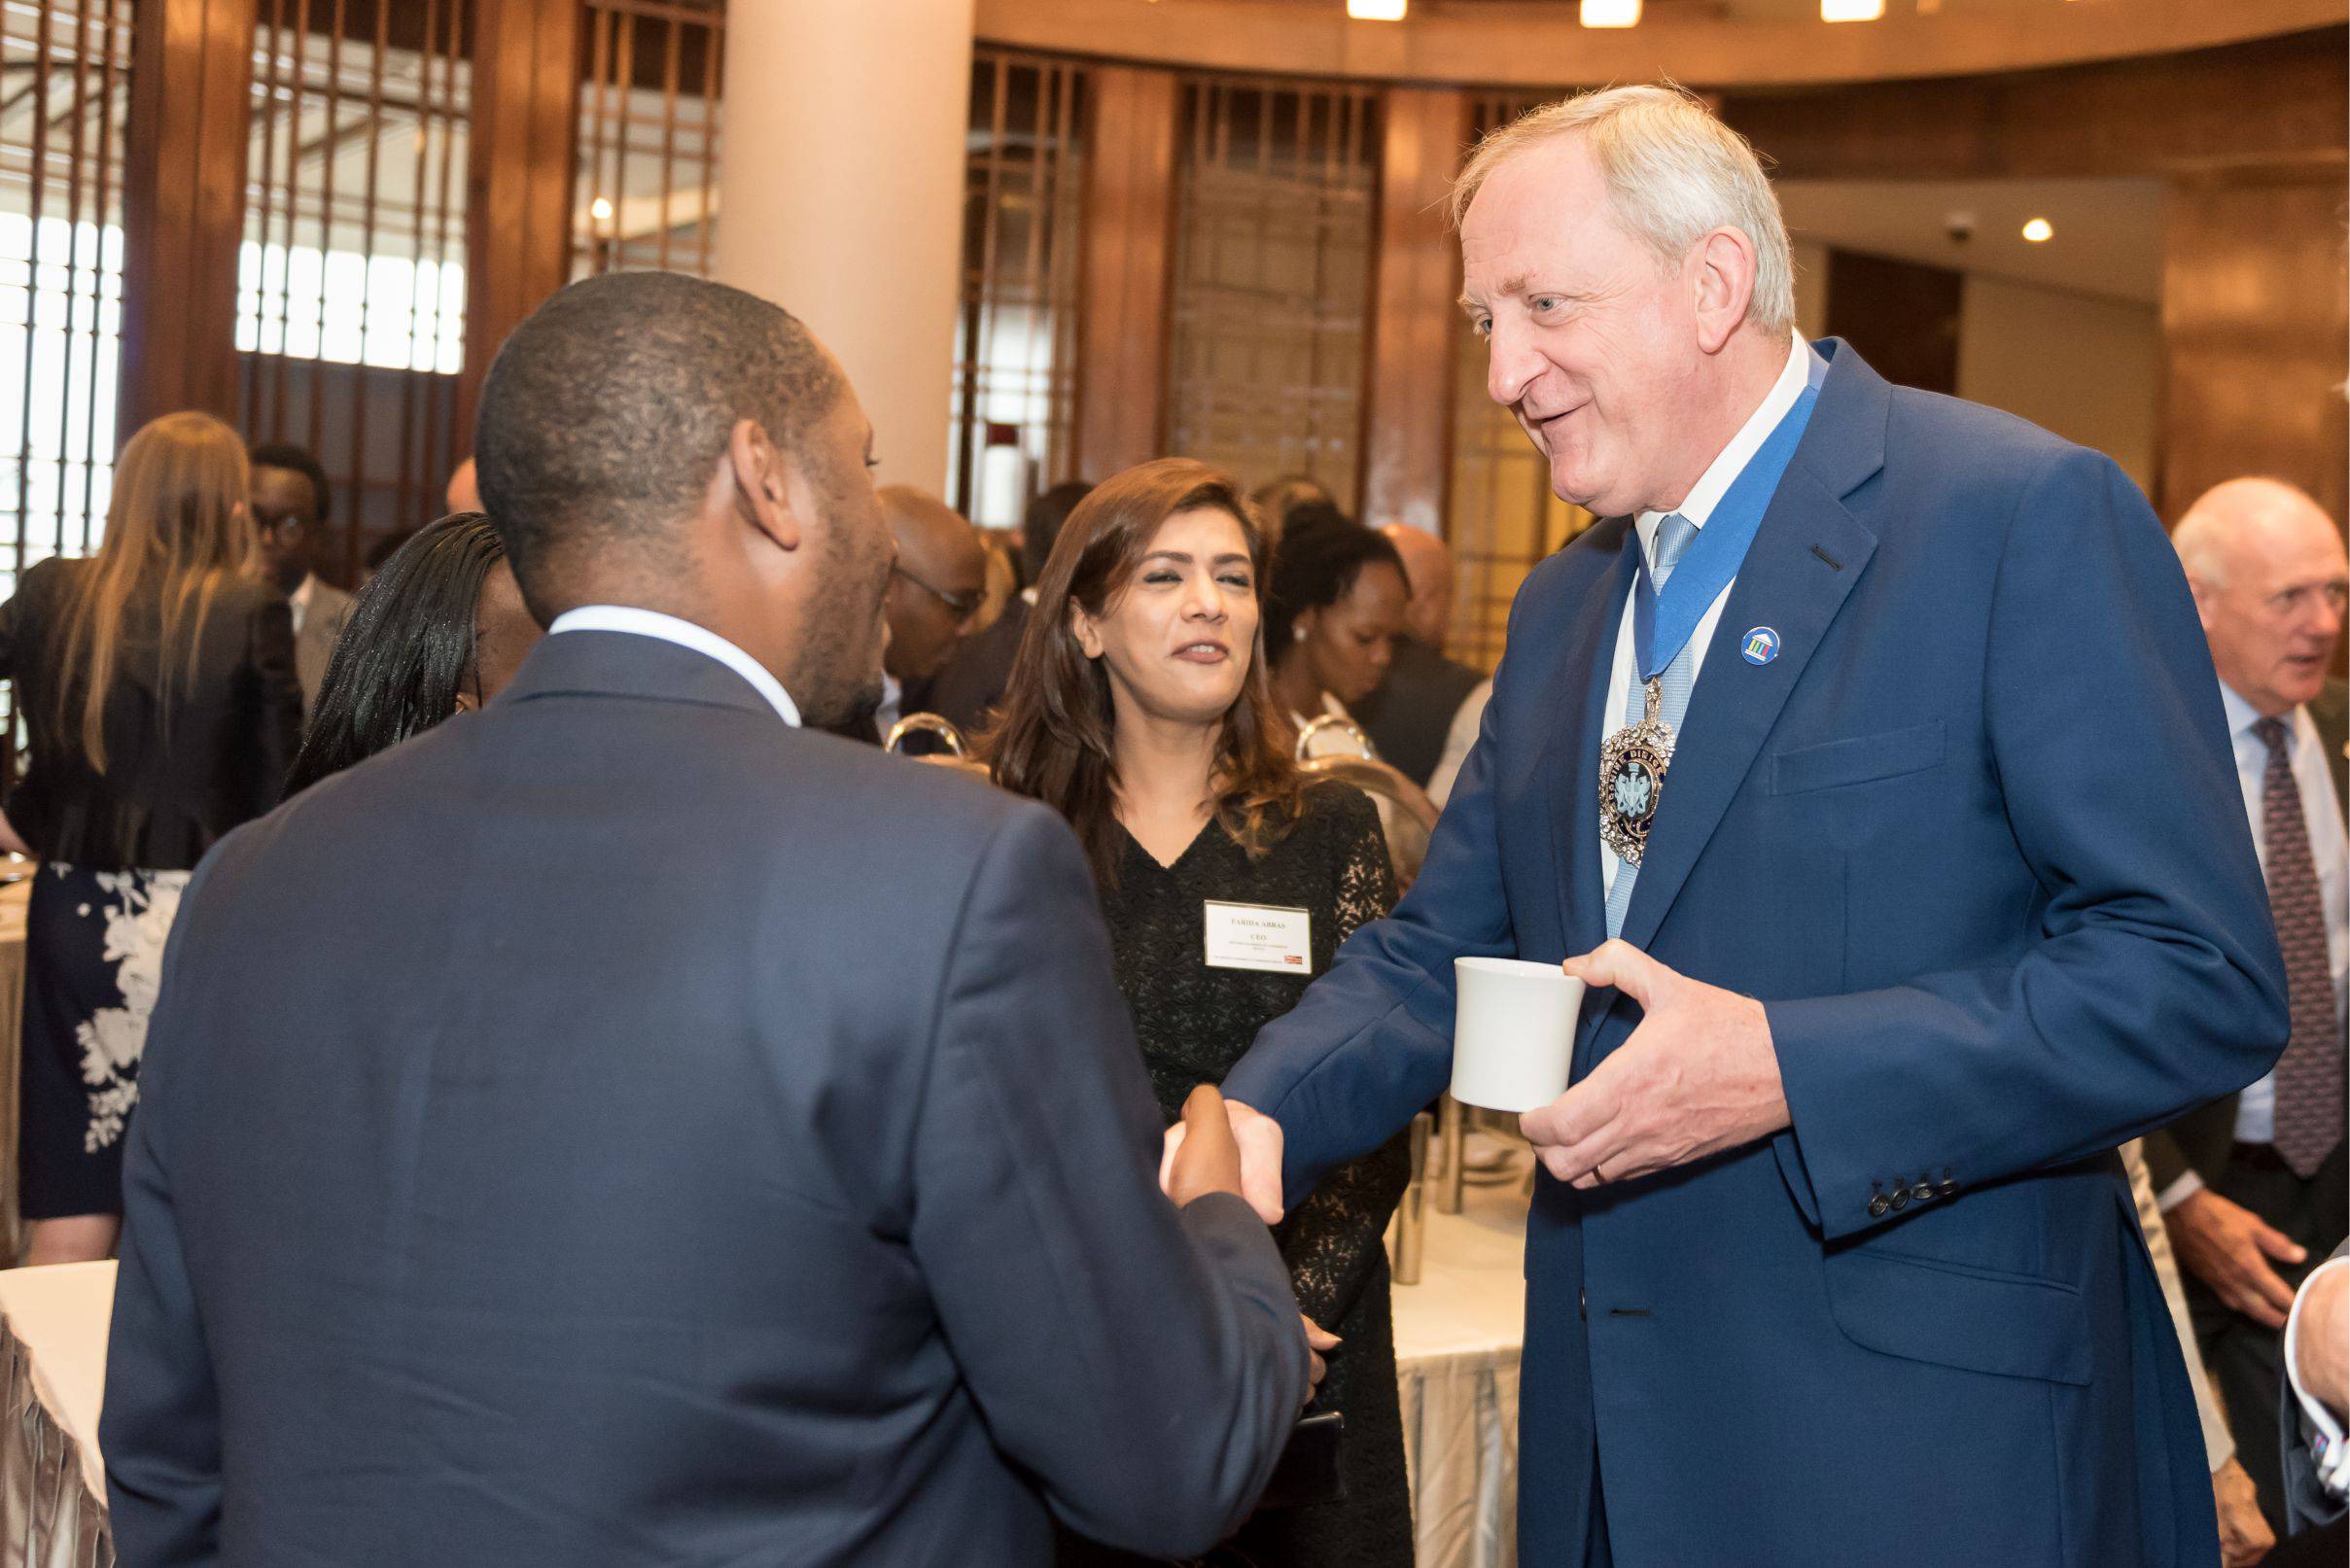 Breakfast with the Lord Mayor of the City of London 73